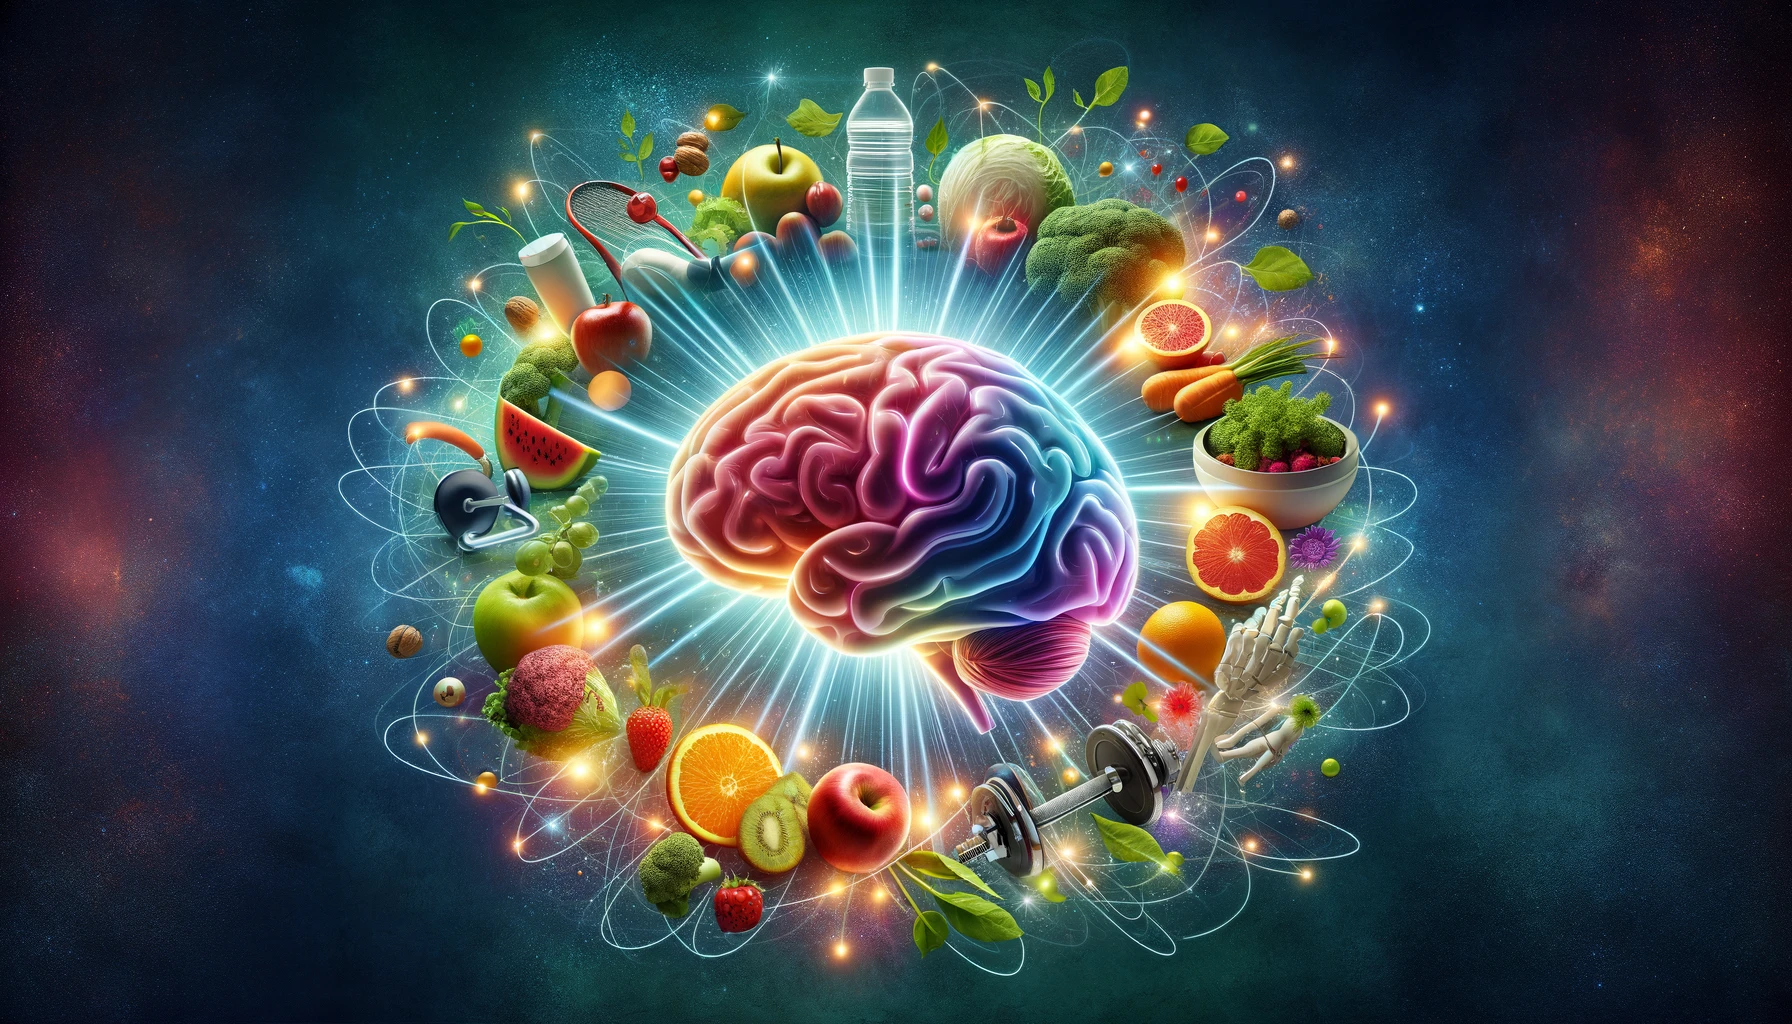 Healthy brain surrounded by fruits, vegetables, and fitness equipment, representing brain health on Healthy Life - New Start.